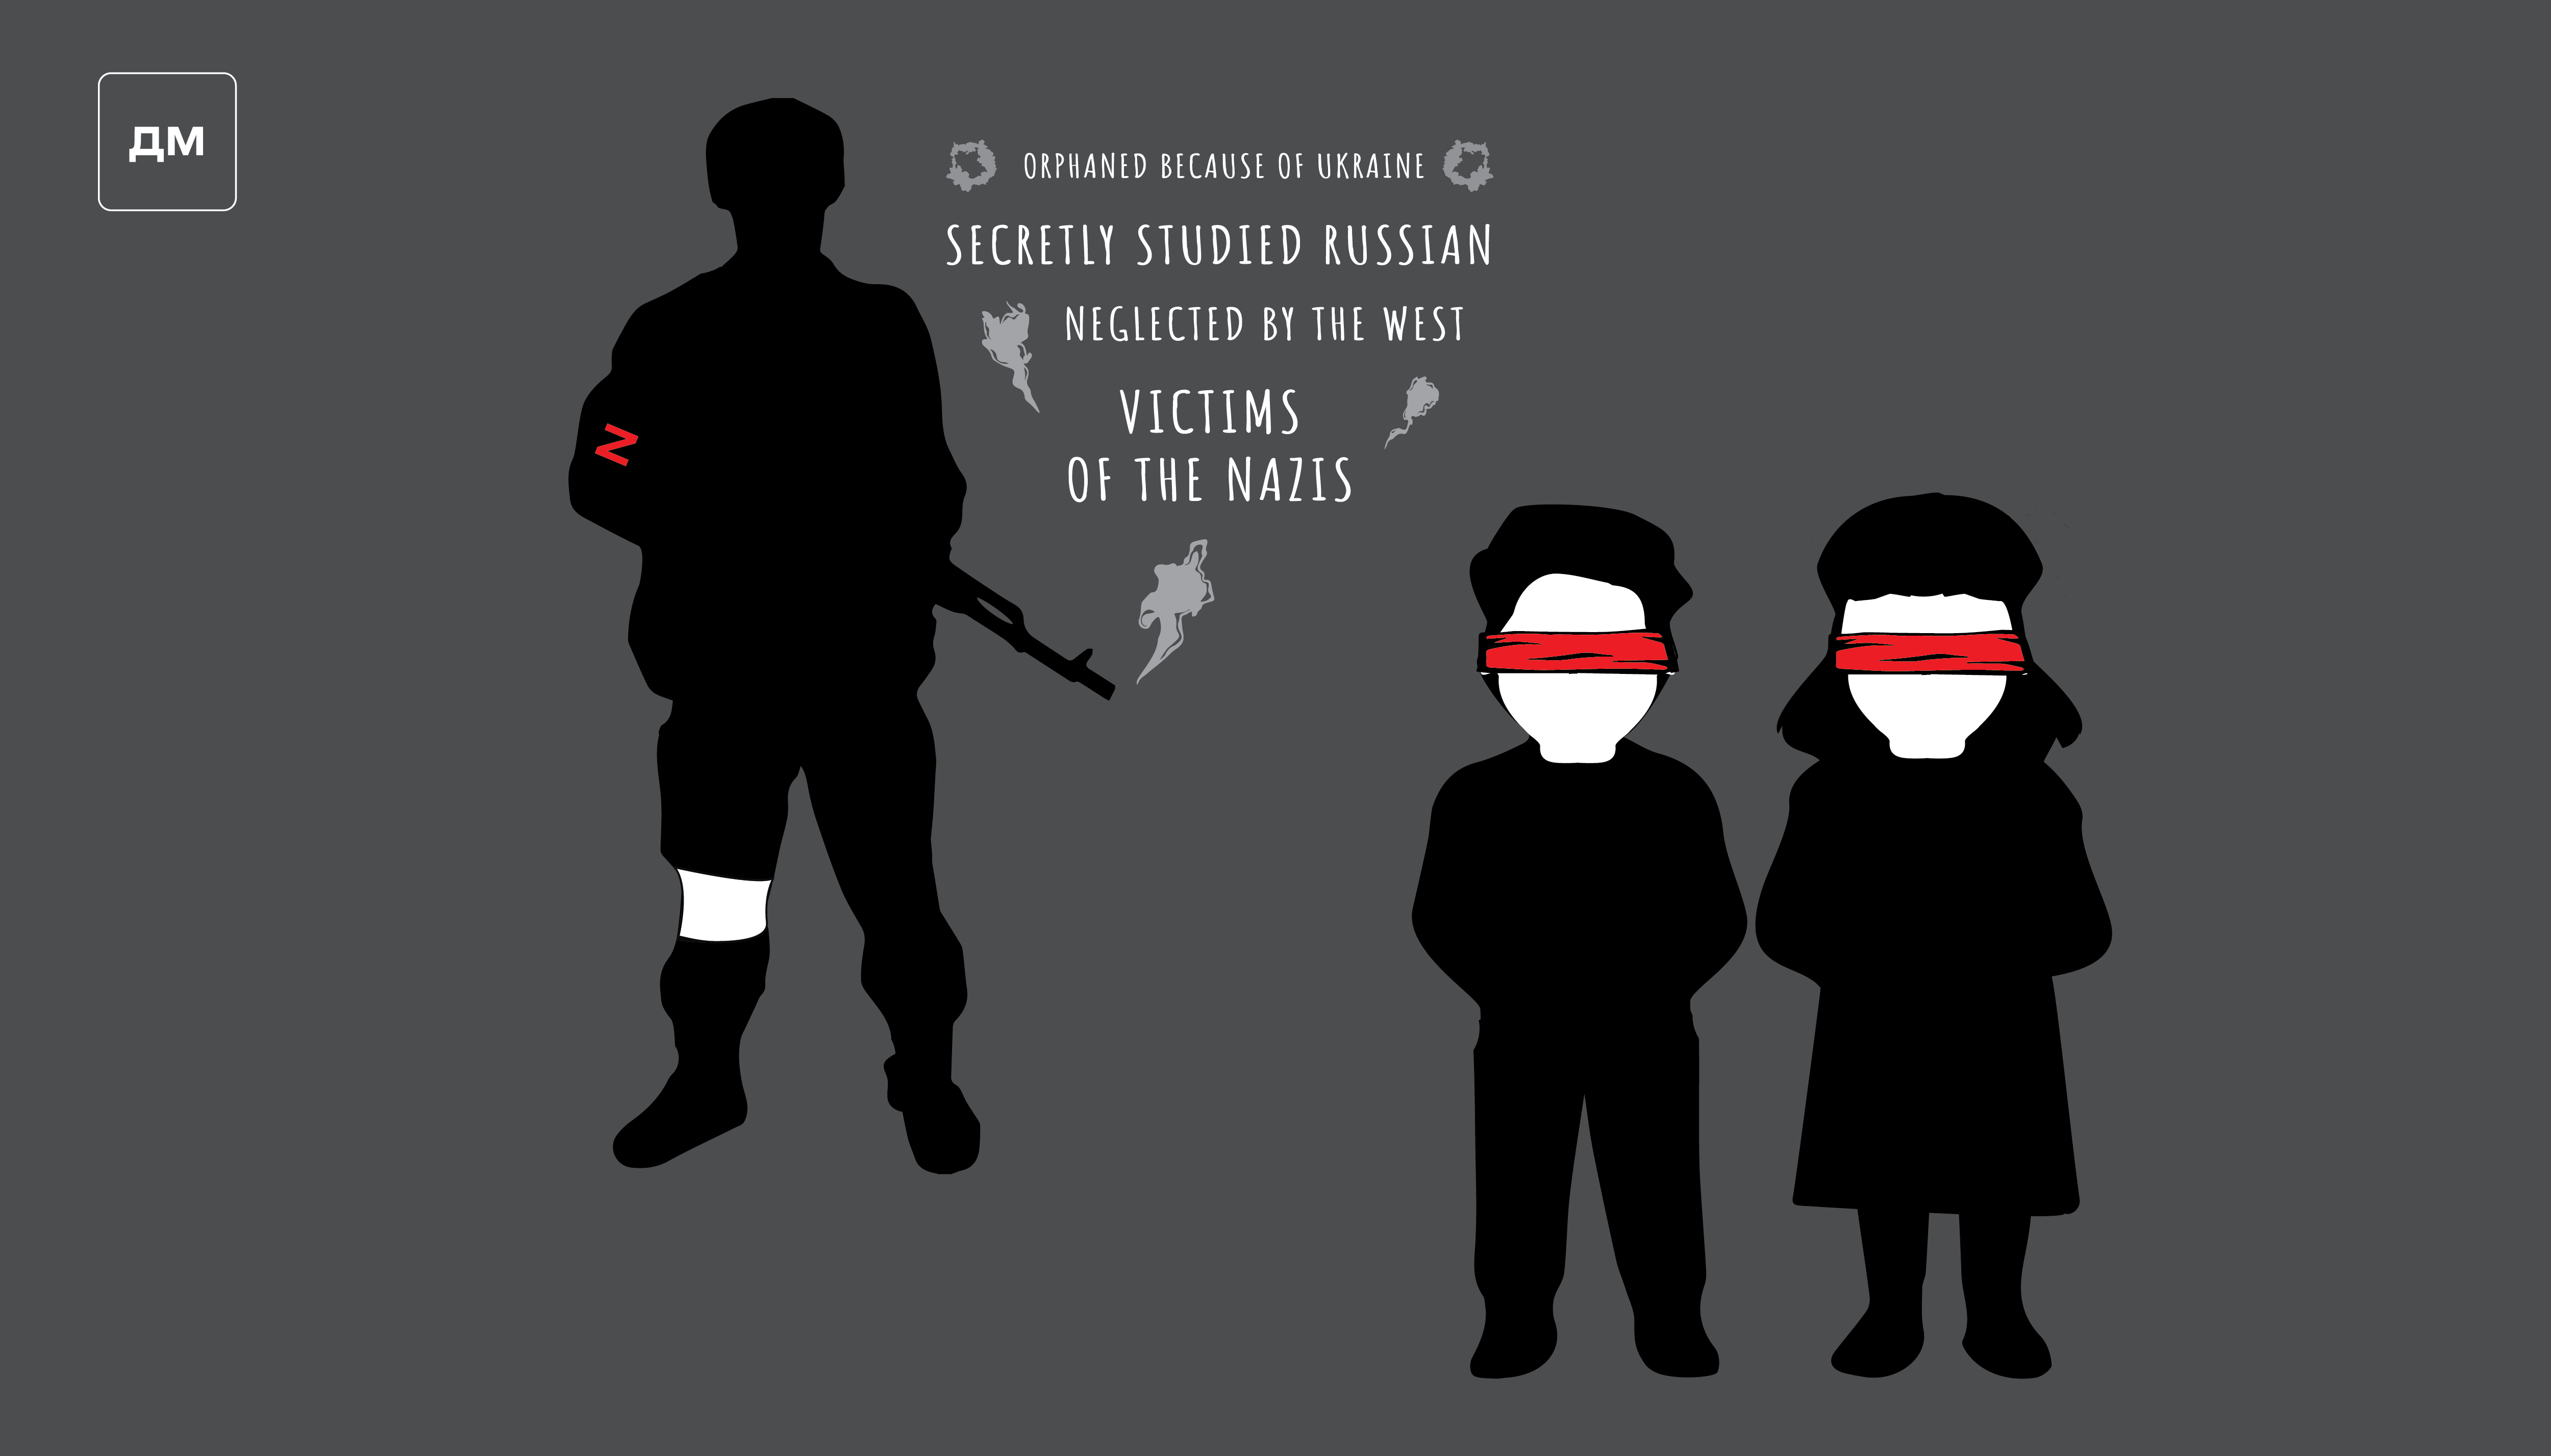 Image: ‘Revenge for the Children of the Donbas’. How Russia Justifies Deportation and Other War Crimes in Ukraine